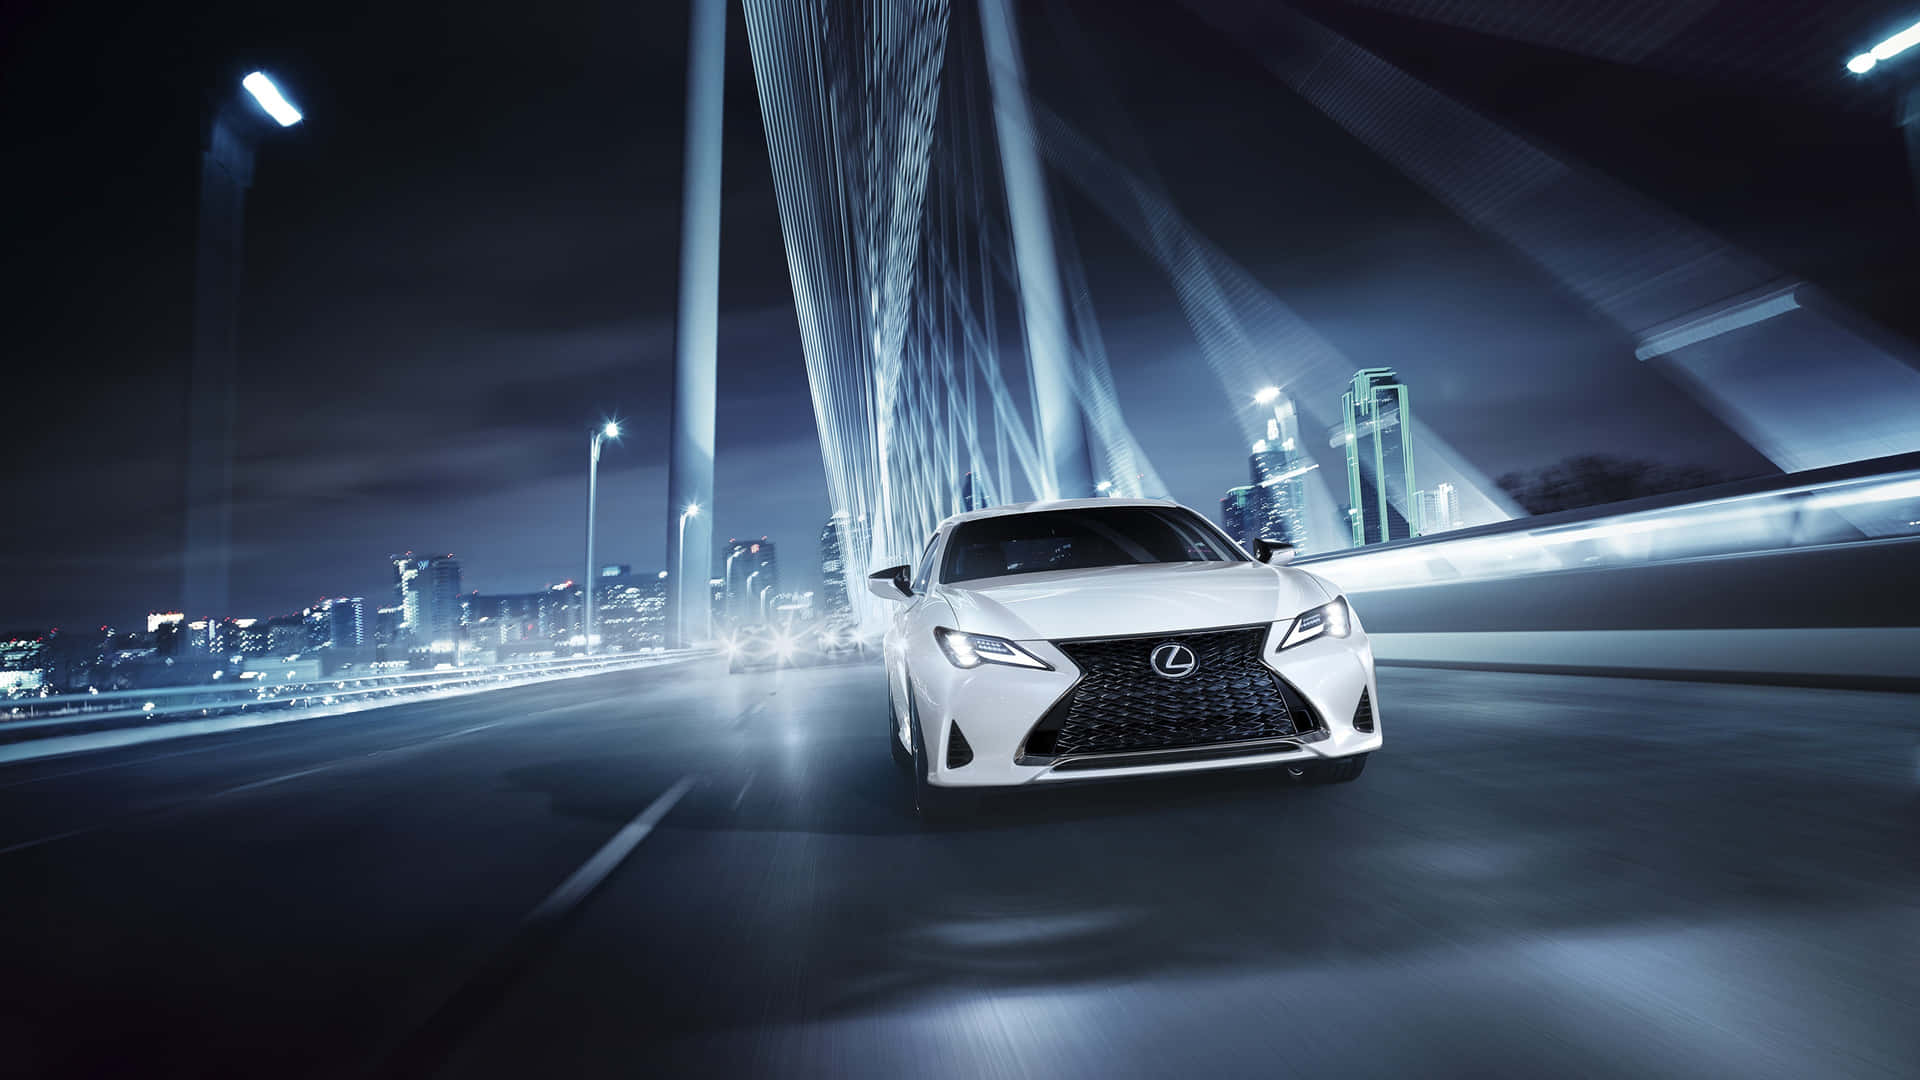 The White Lexus Cx Is Driving On A Bridge At Night